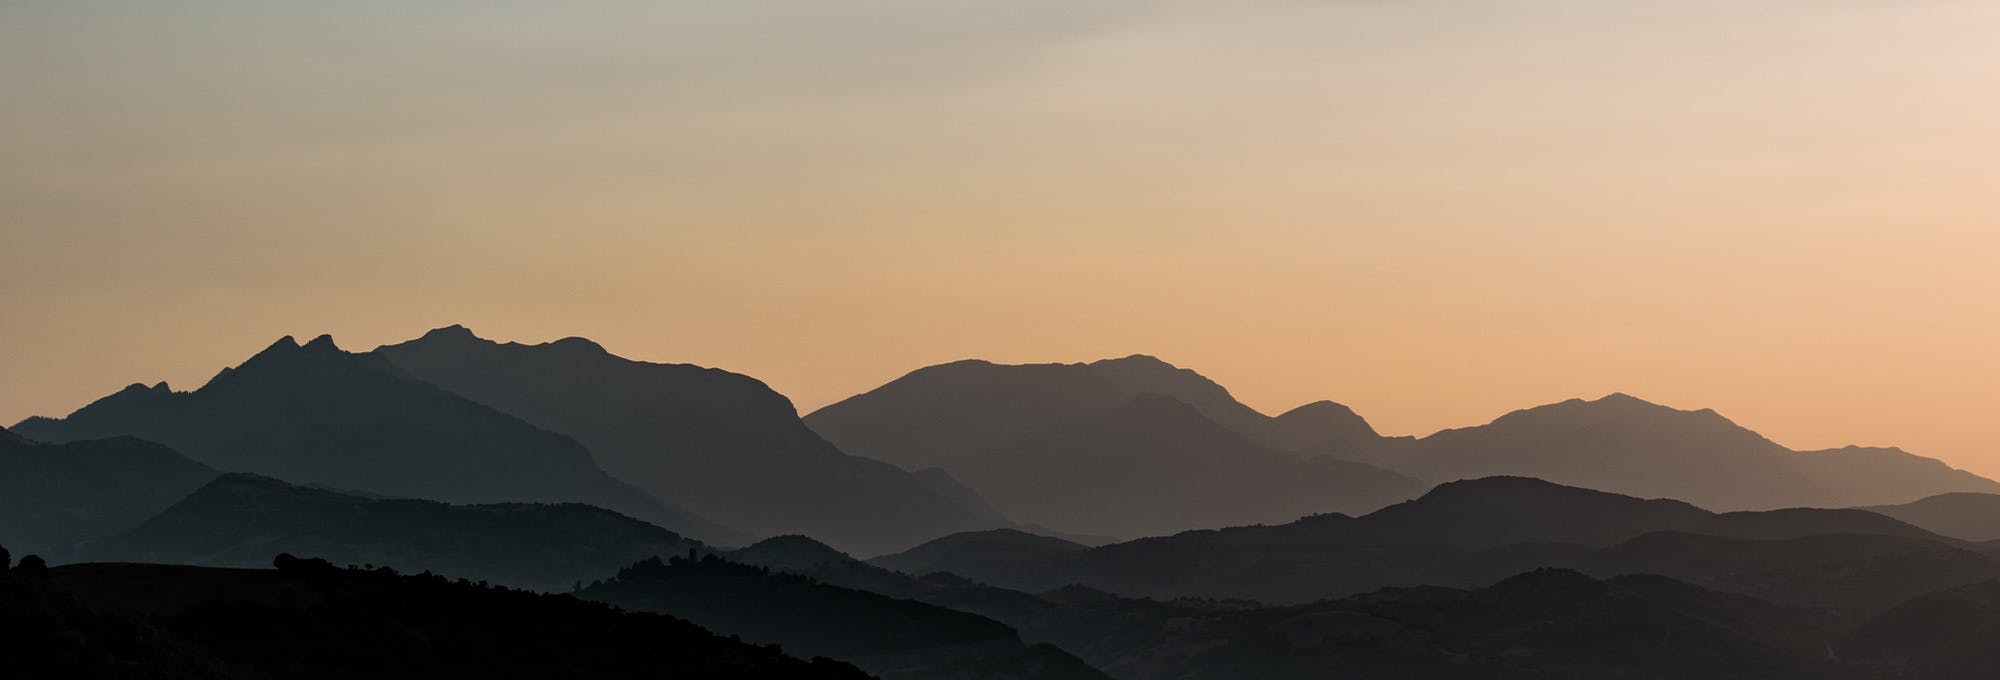 Mountains during sunset representing logarithmic regression